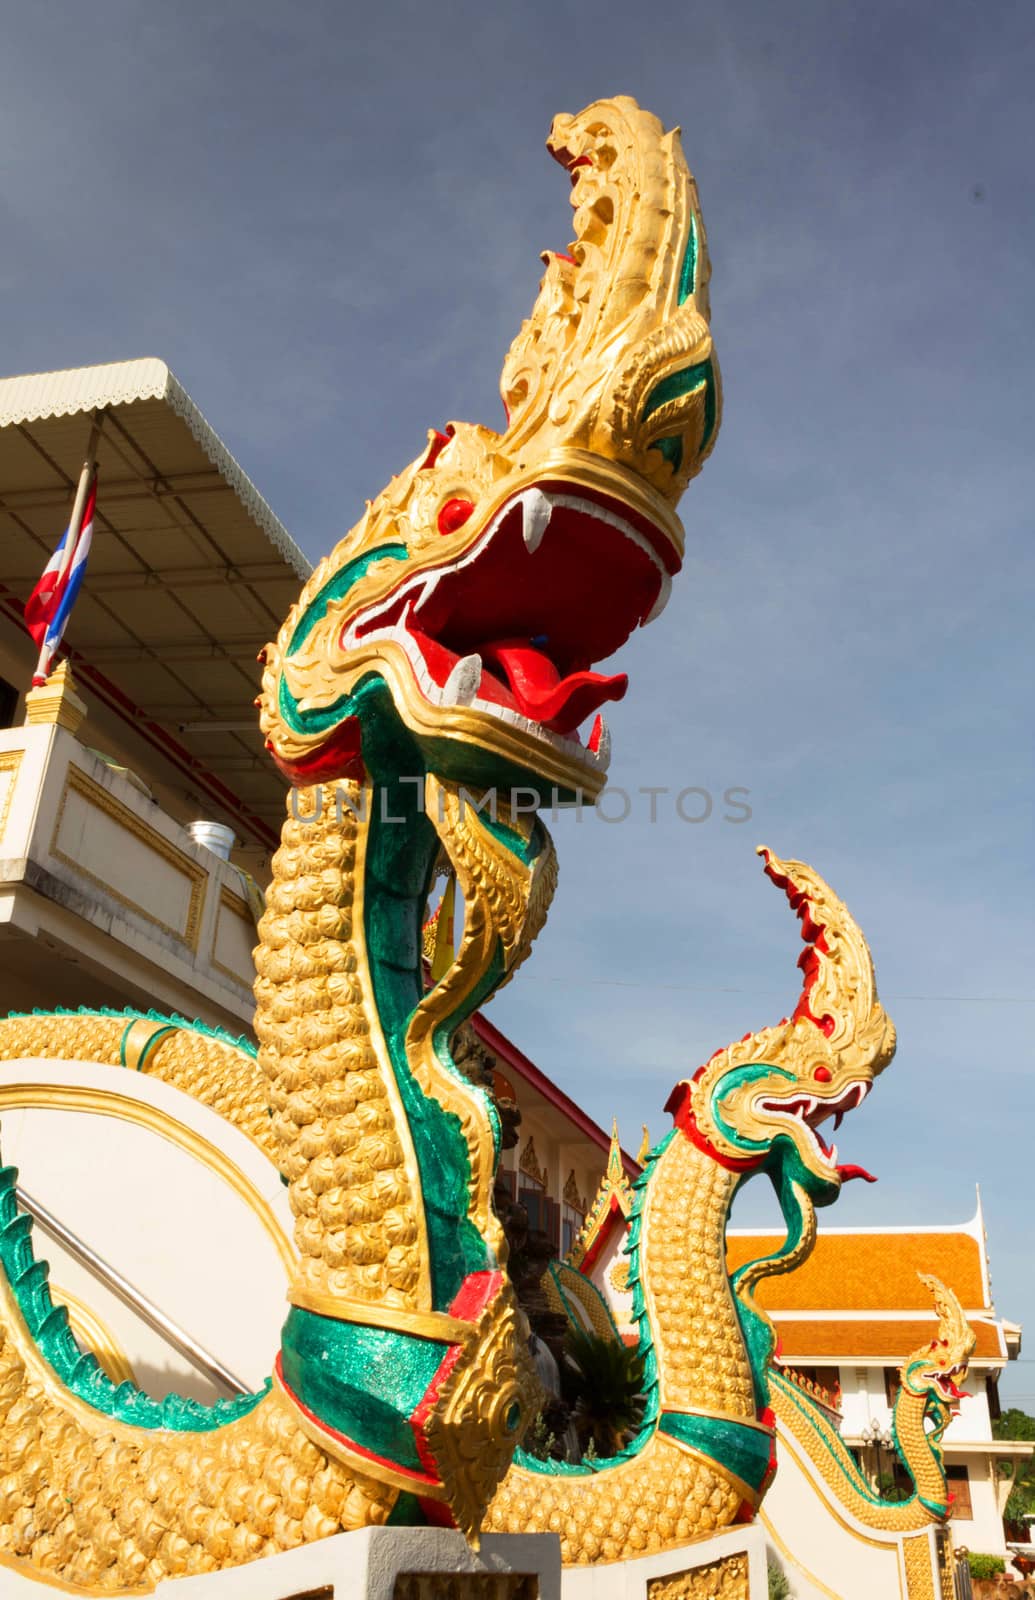 Naga Sculpture Art in thai temple.  In Thailand, any kind of art decorated in Buddhist church, temple pavilion, temple hall, etc. created with money donated by people, it a public treasure of Buddhism not for copyright.